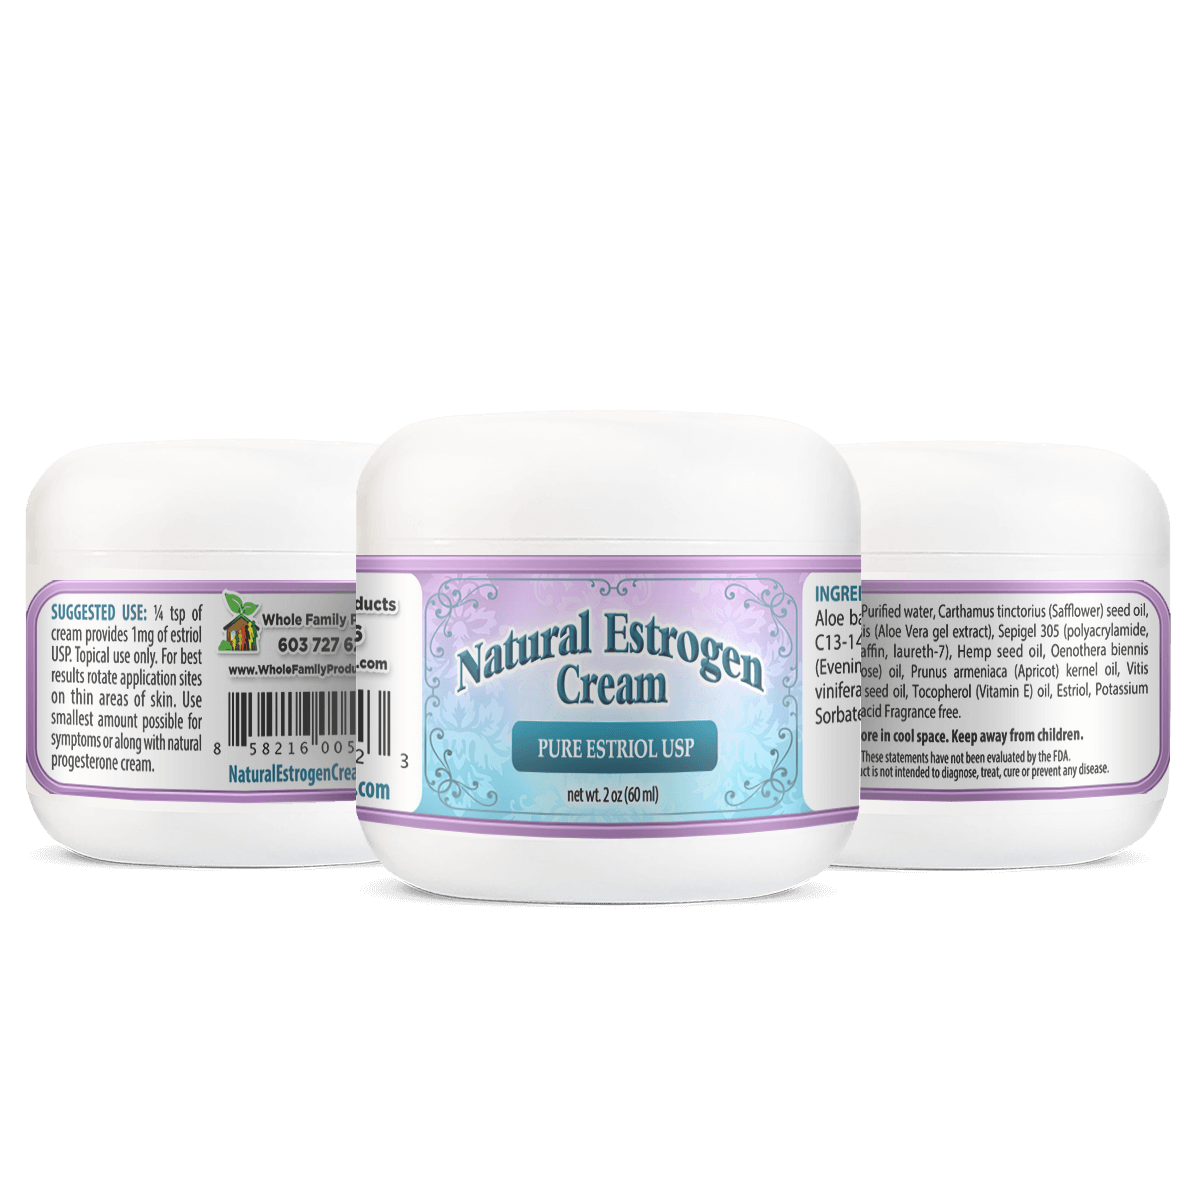 Natural Estrogen Cream 2oz Jar Help Decrease Occurrence of Night Sweats and Hot Flashes